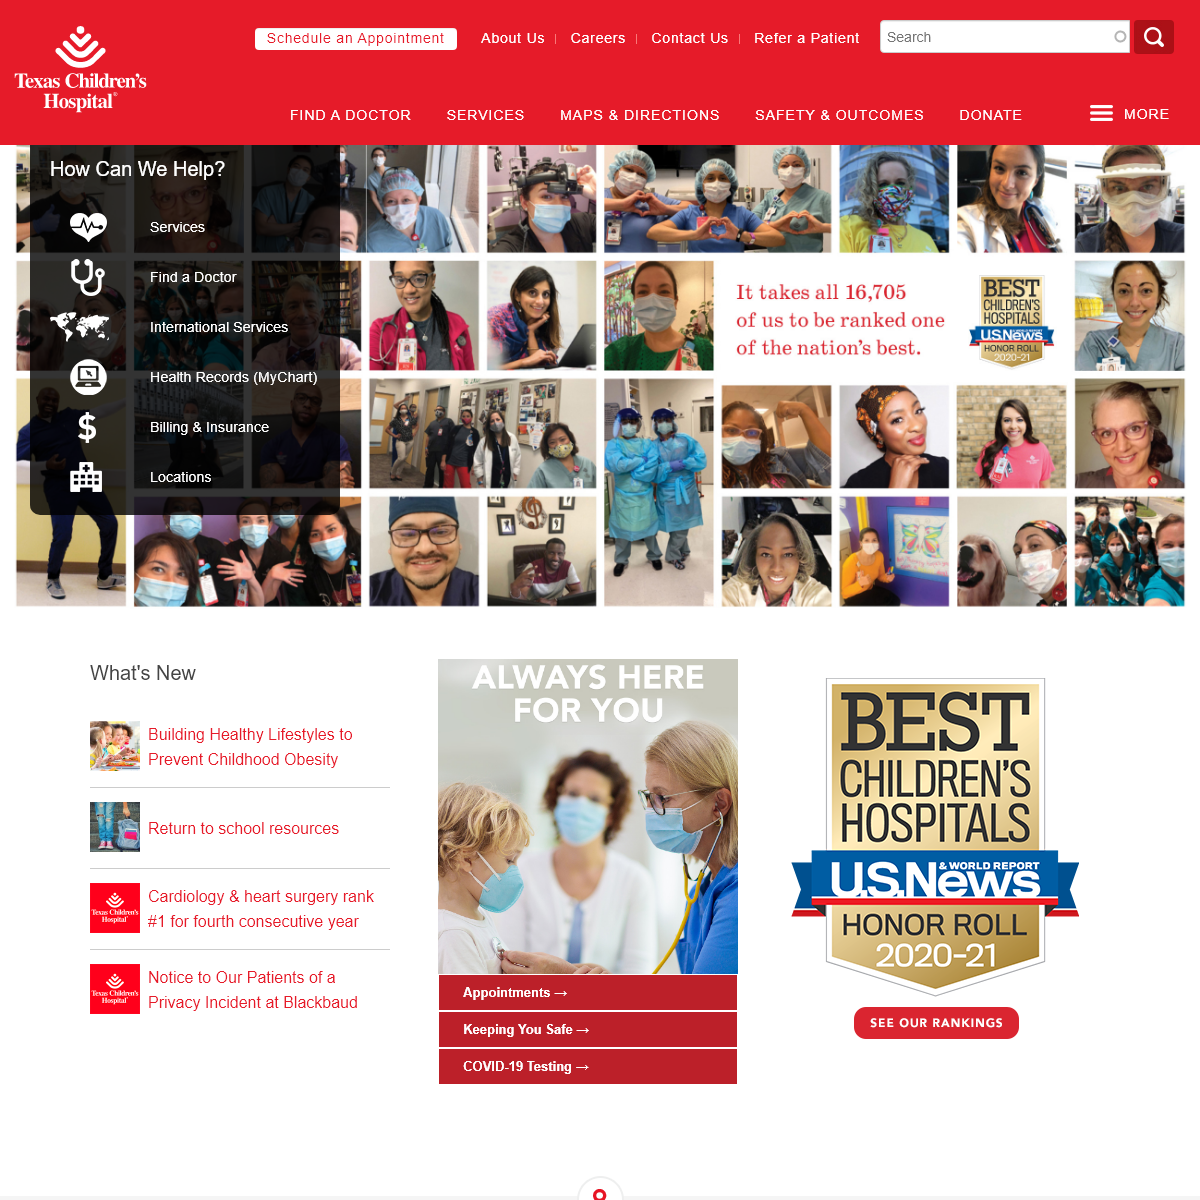 A complete backup of texaschildrens.org